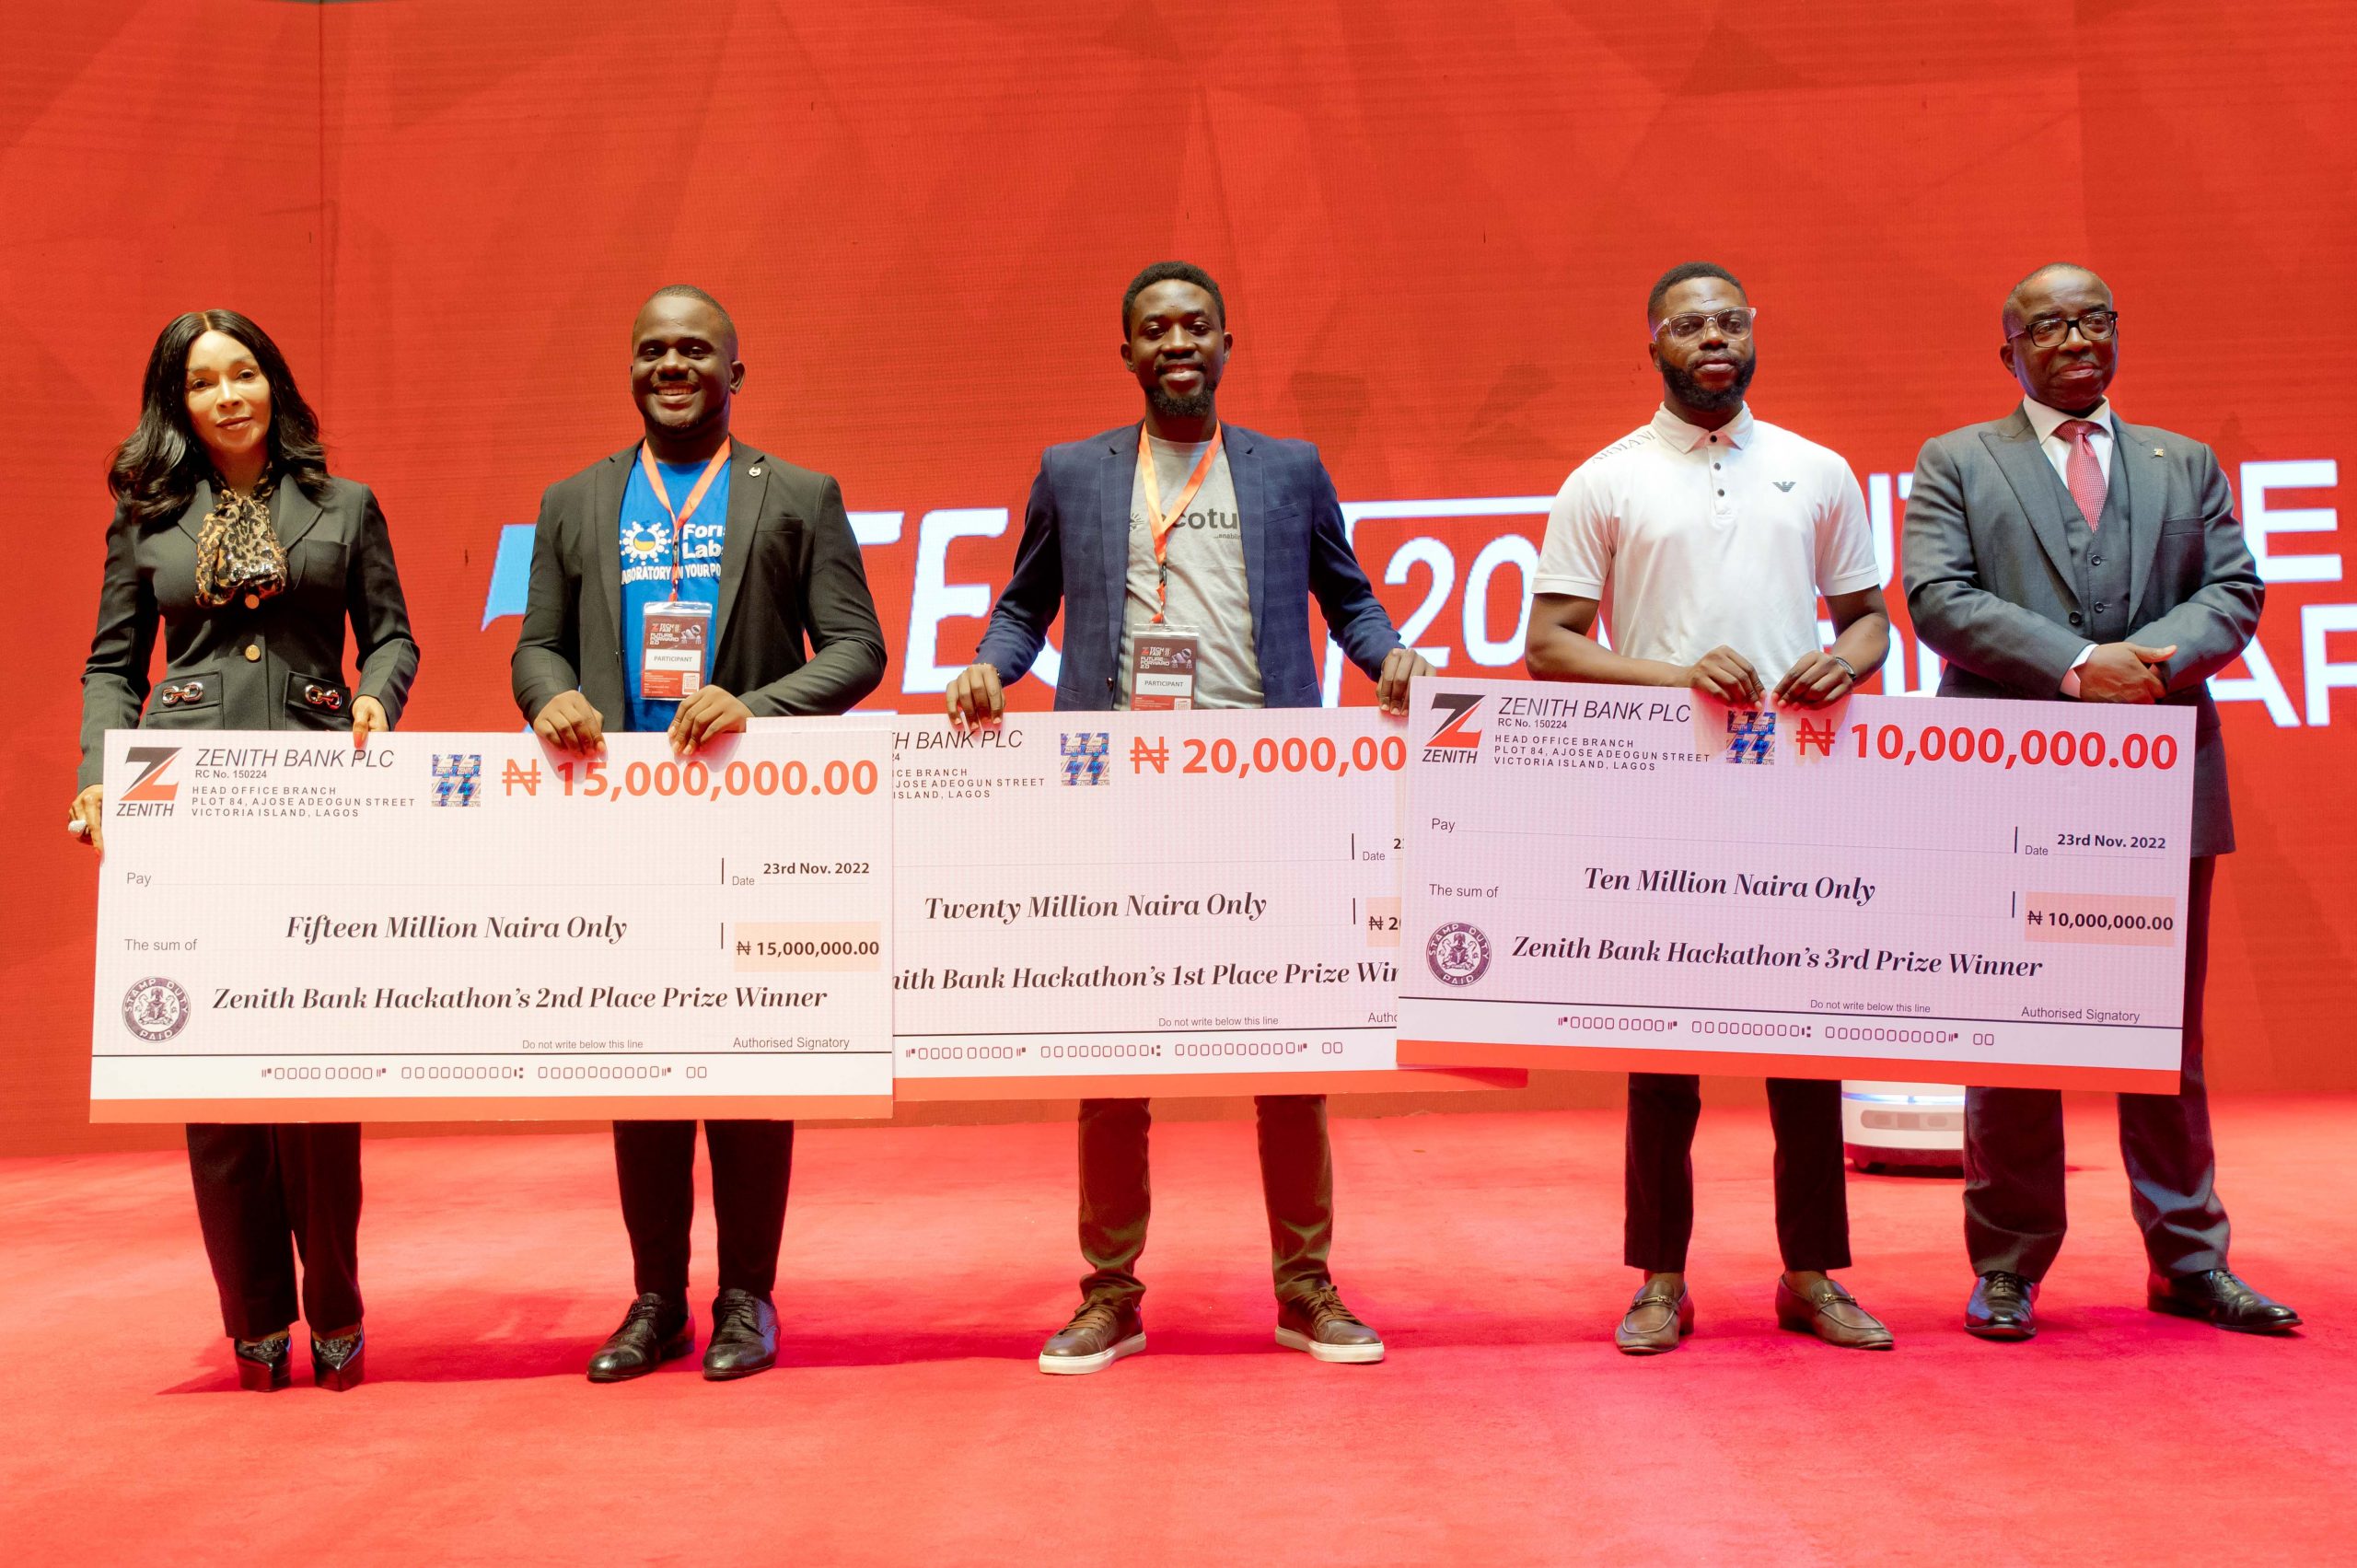 ZENITH TECH FAIR 2.0 ENDS ON A HIGH AS HACKATHON FINALISTS ARE REWARDED WITH N53M